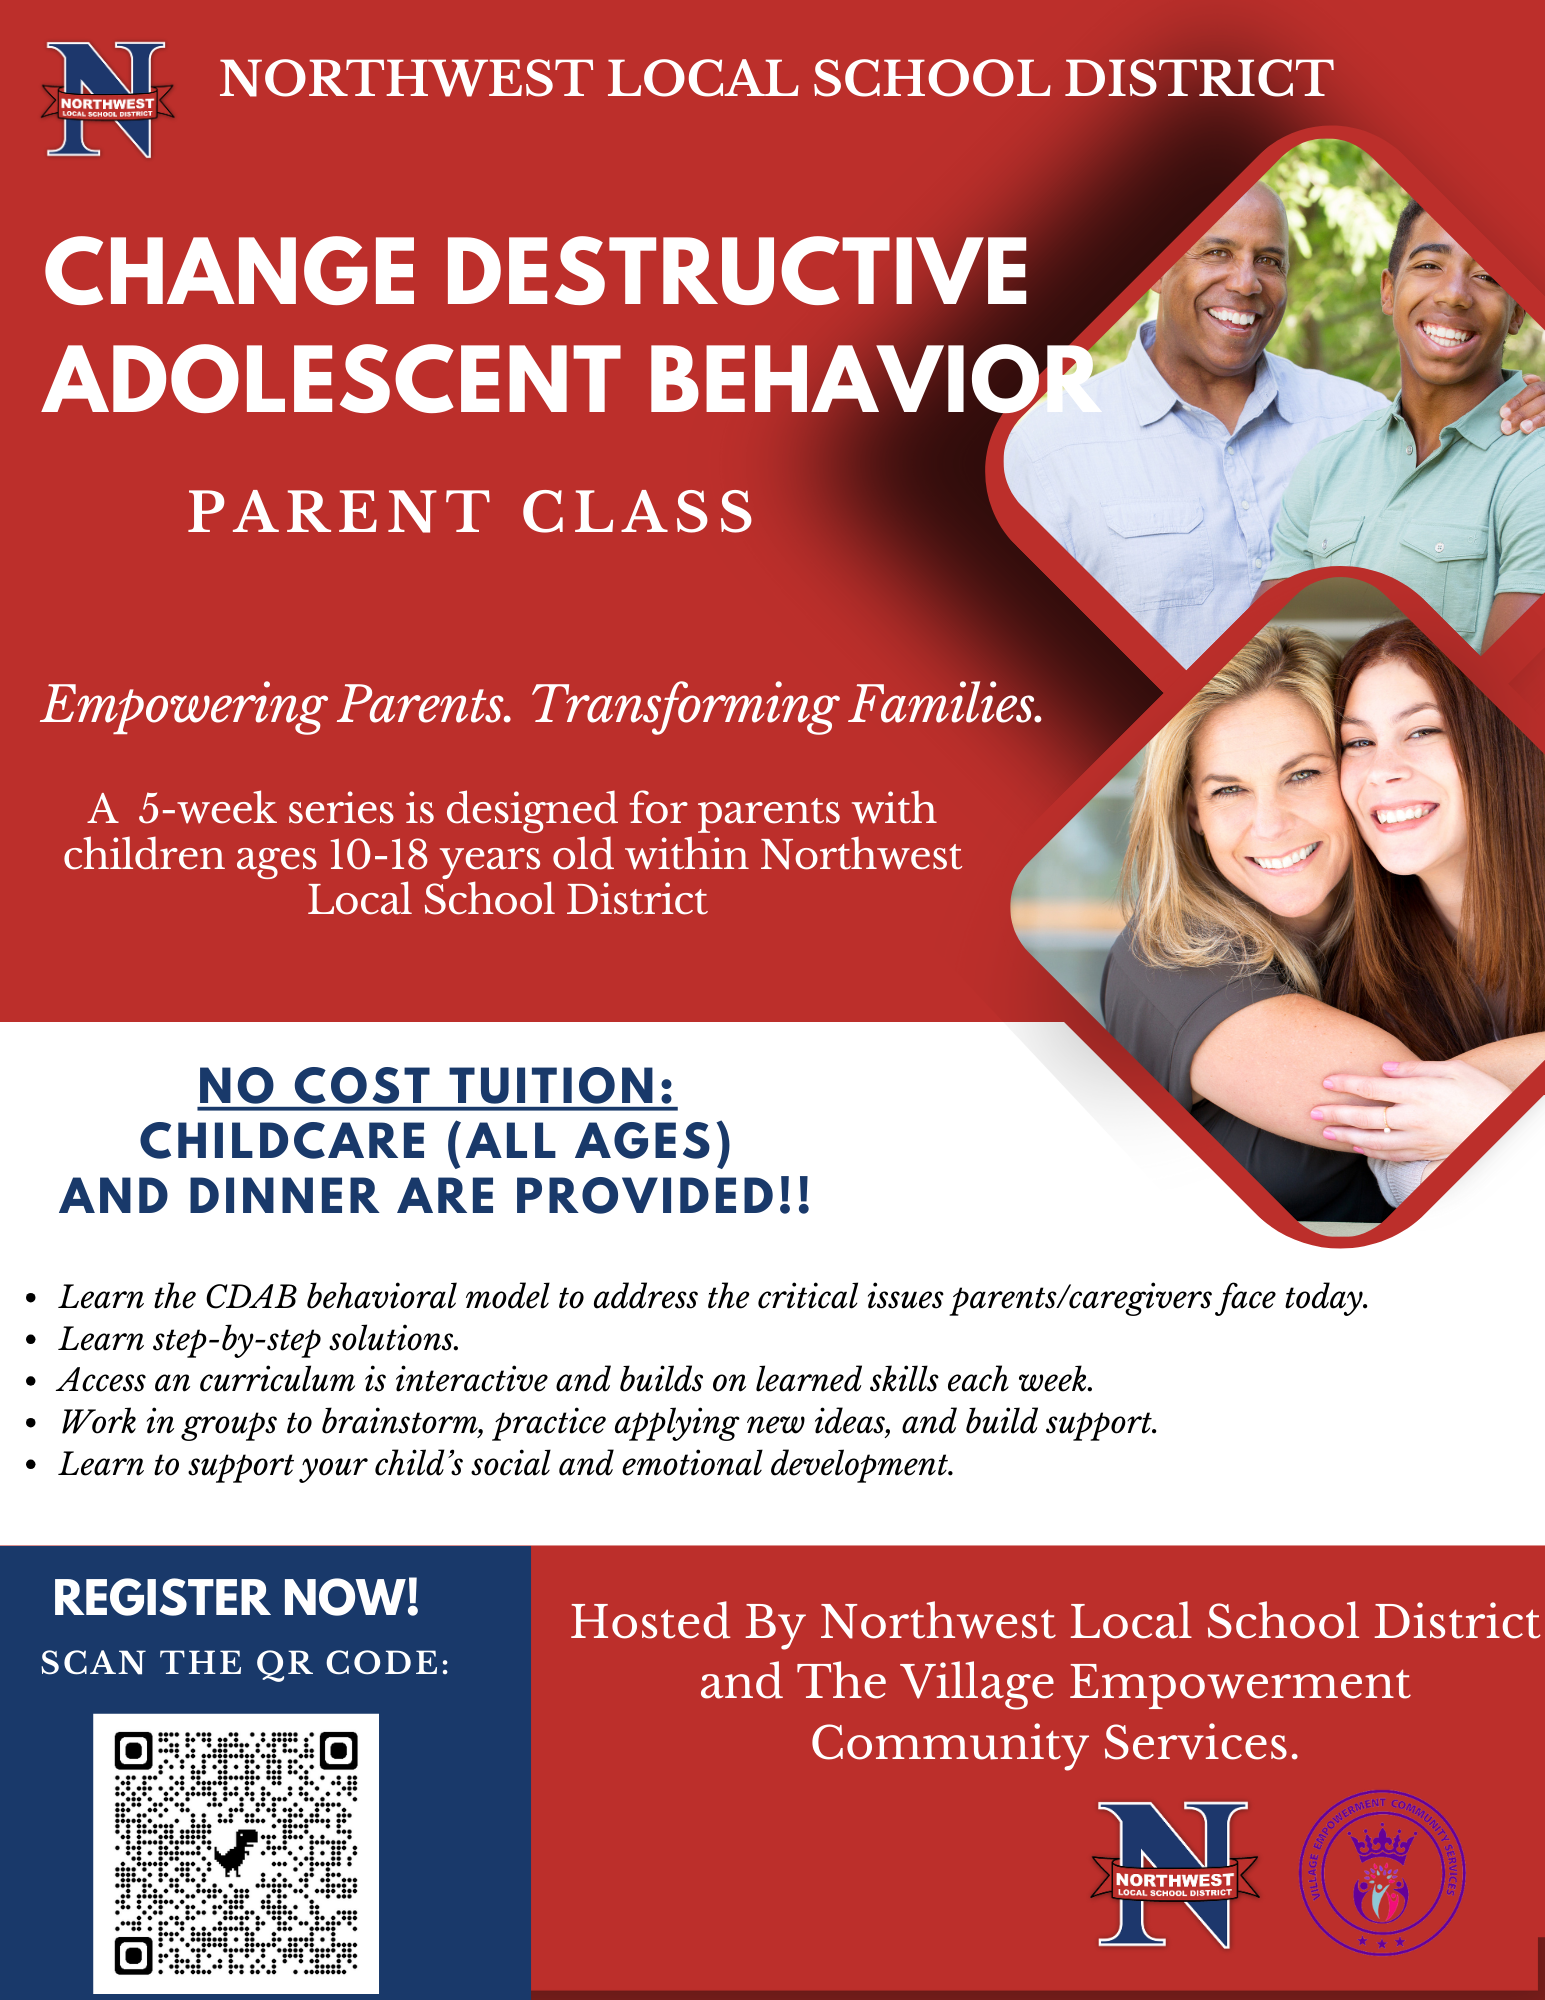 Northwest Local School District (NWLSD) is partnering with Village Empowerment Community Services (VECS) organization for a fourth school year, to offer an intensive 5-week long parenting class. A Parent’s Guide to Changing Destructive Adolescent Behavior (CDAB) is the only parent training program that addresses the MOST destructive of adolescent behaviors such as: chronic school truancy, running away from home, taking unhealthy risk, and but not limited to thoughts of experimenting or experimenting with drugs and/or alcohol.  This program uses the CDAB behavioral model to address the critical issues parents/caregivers face today and offers step-by-step solutions.  The curriculum is interactive and builds on learned skills each week. Parents/caregivers will be given the opportunity to work in groups to brainstorm, practice applying new ideas, and build support.  Strategies learned in the group will better prepare parents/caregivers to support their child’s social and emotional development.     The program is completely FREE  and is open to all parents who reside in the NWLSD community and have children between 10 -18 years of age.  Participation is mandatory and classes will be closed after the second week. Childcare (all ages) and dinner will also be provided for FREE on a weekly basis